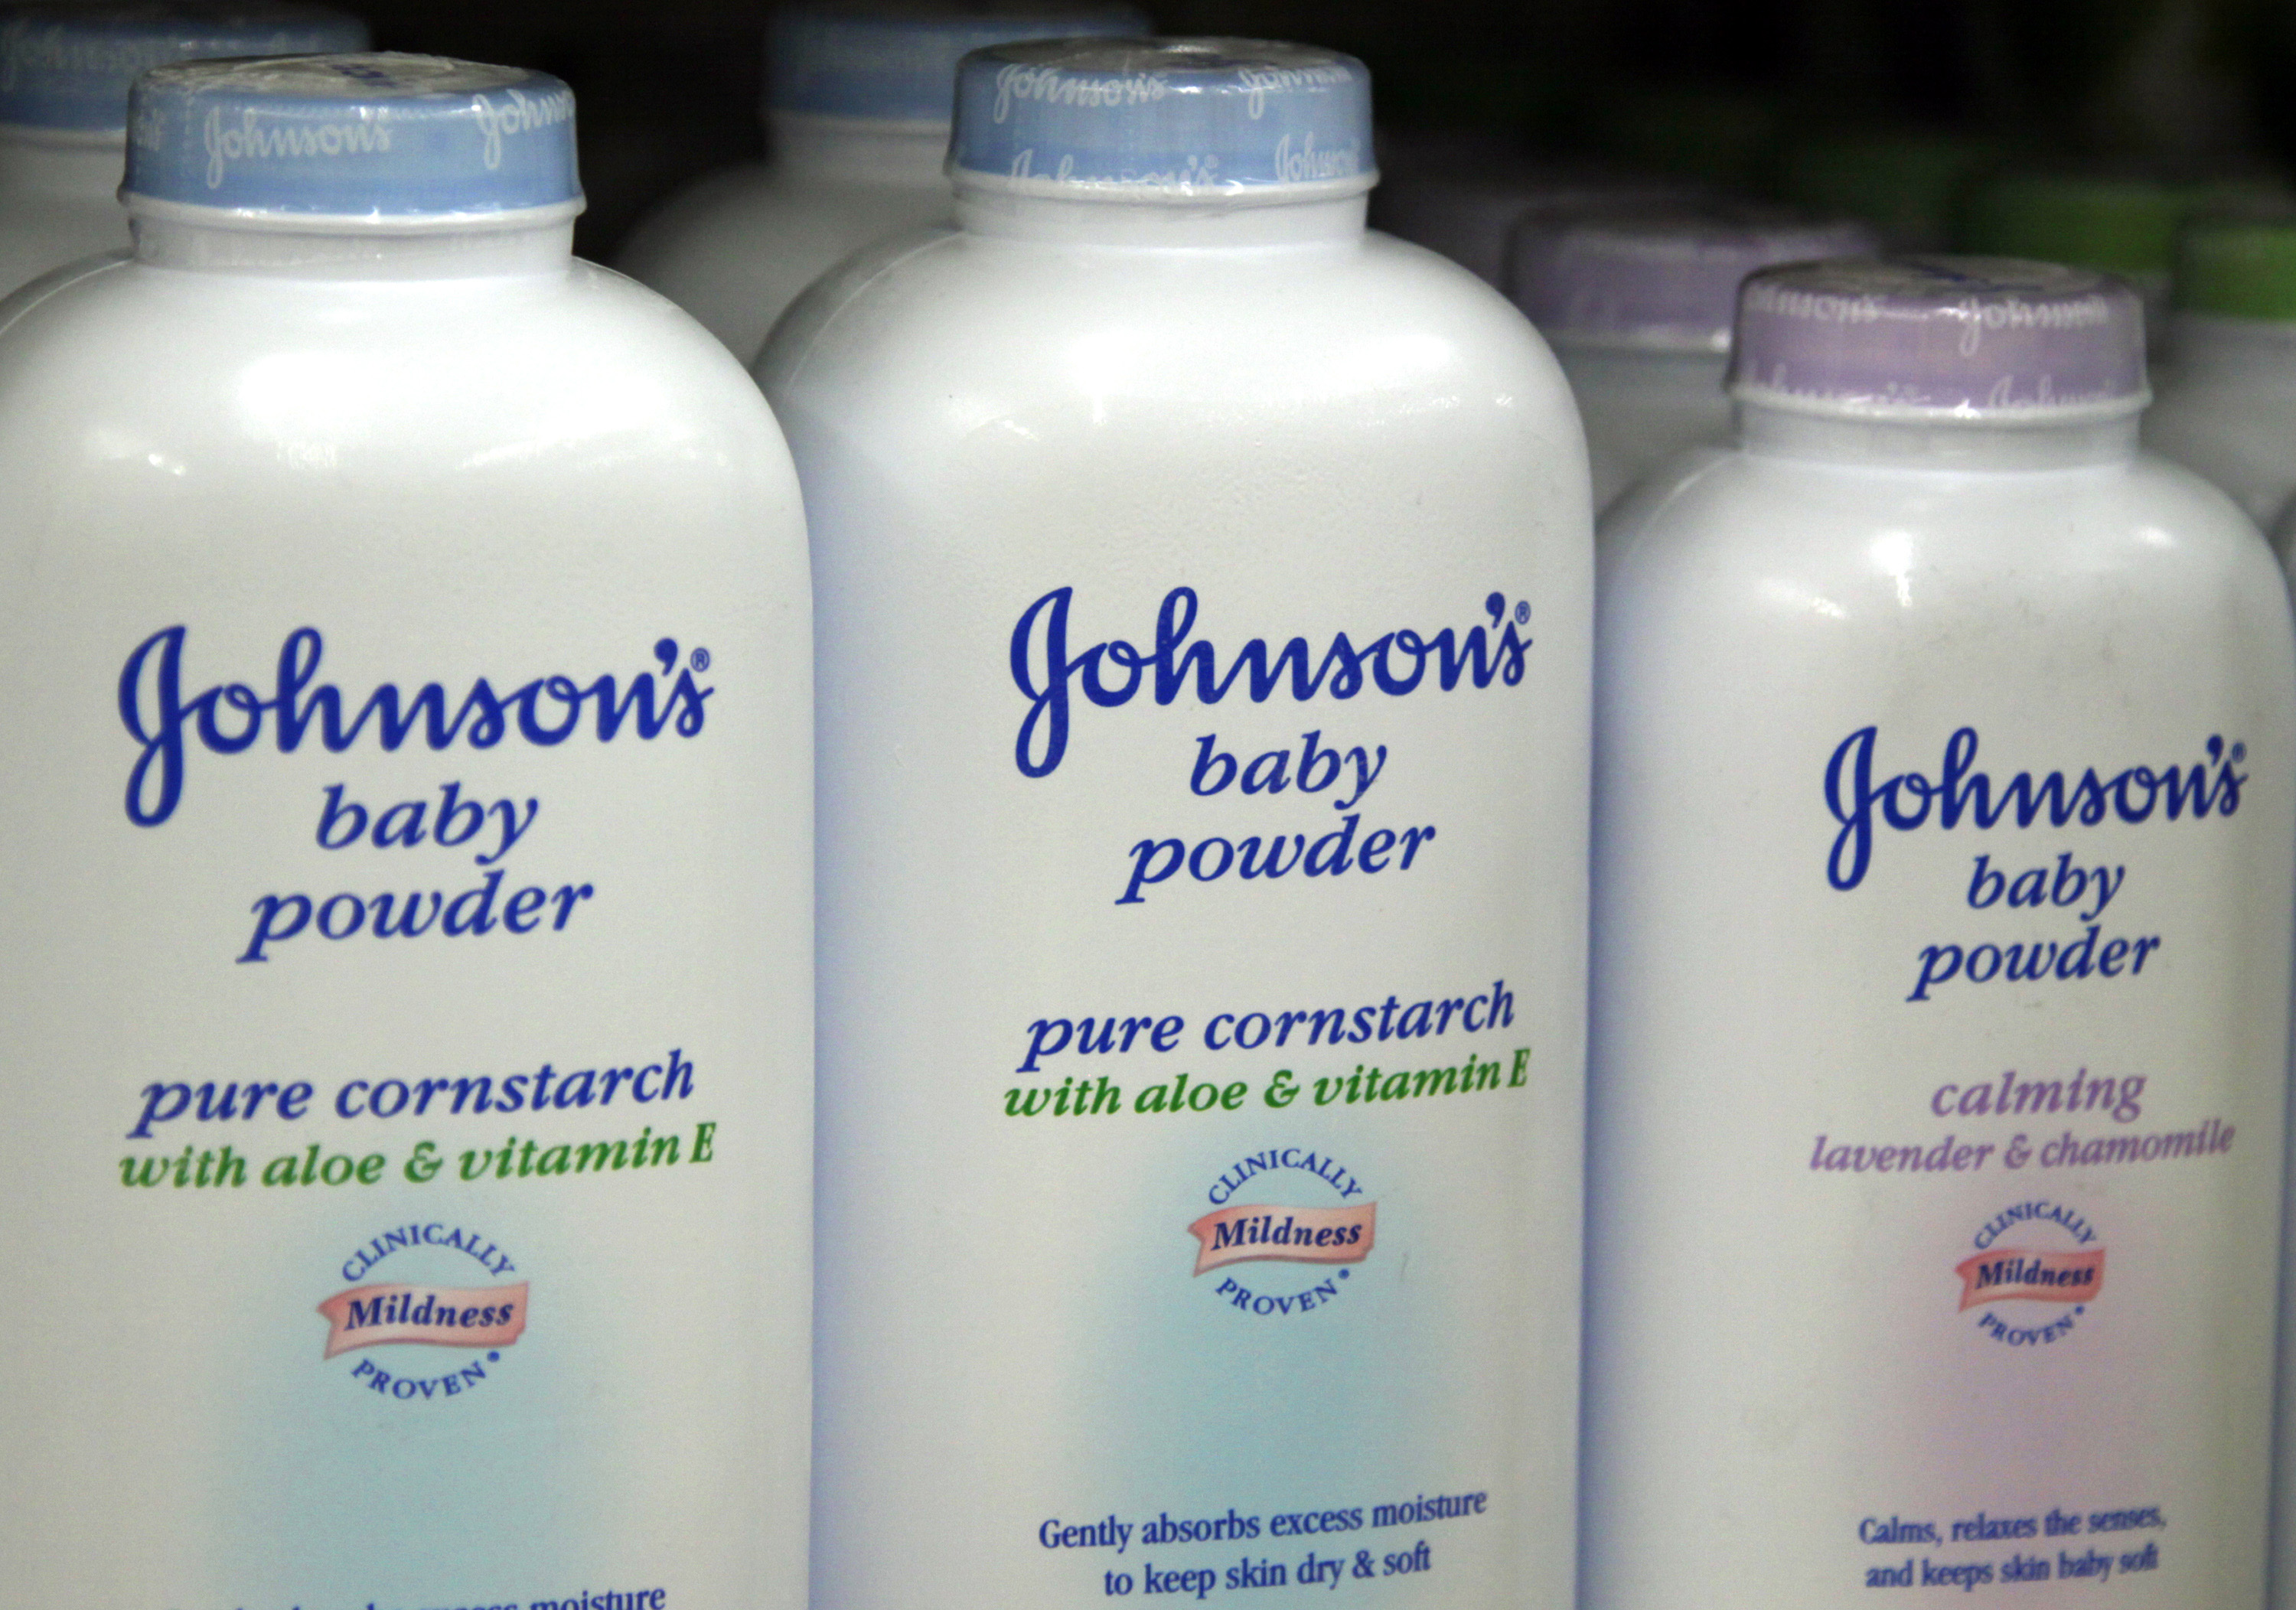 Products made by Johnson & Johnson for sale on a store shelf in Westminster